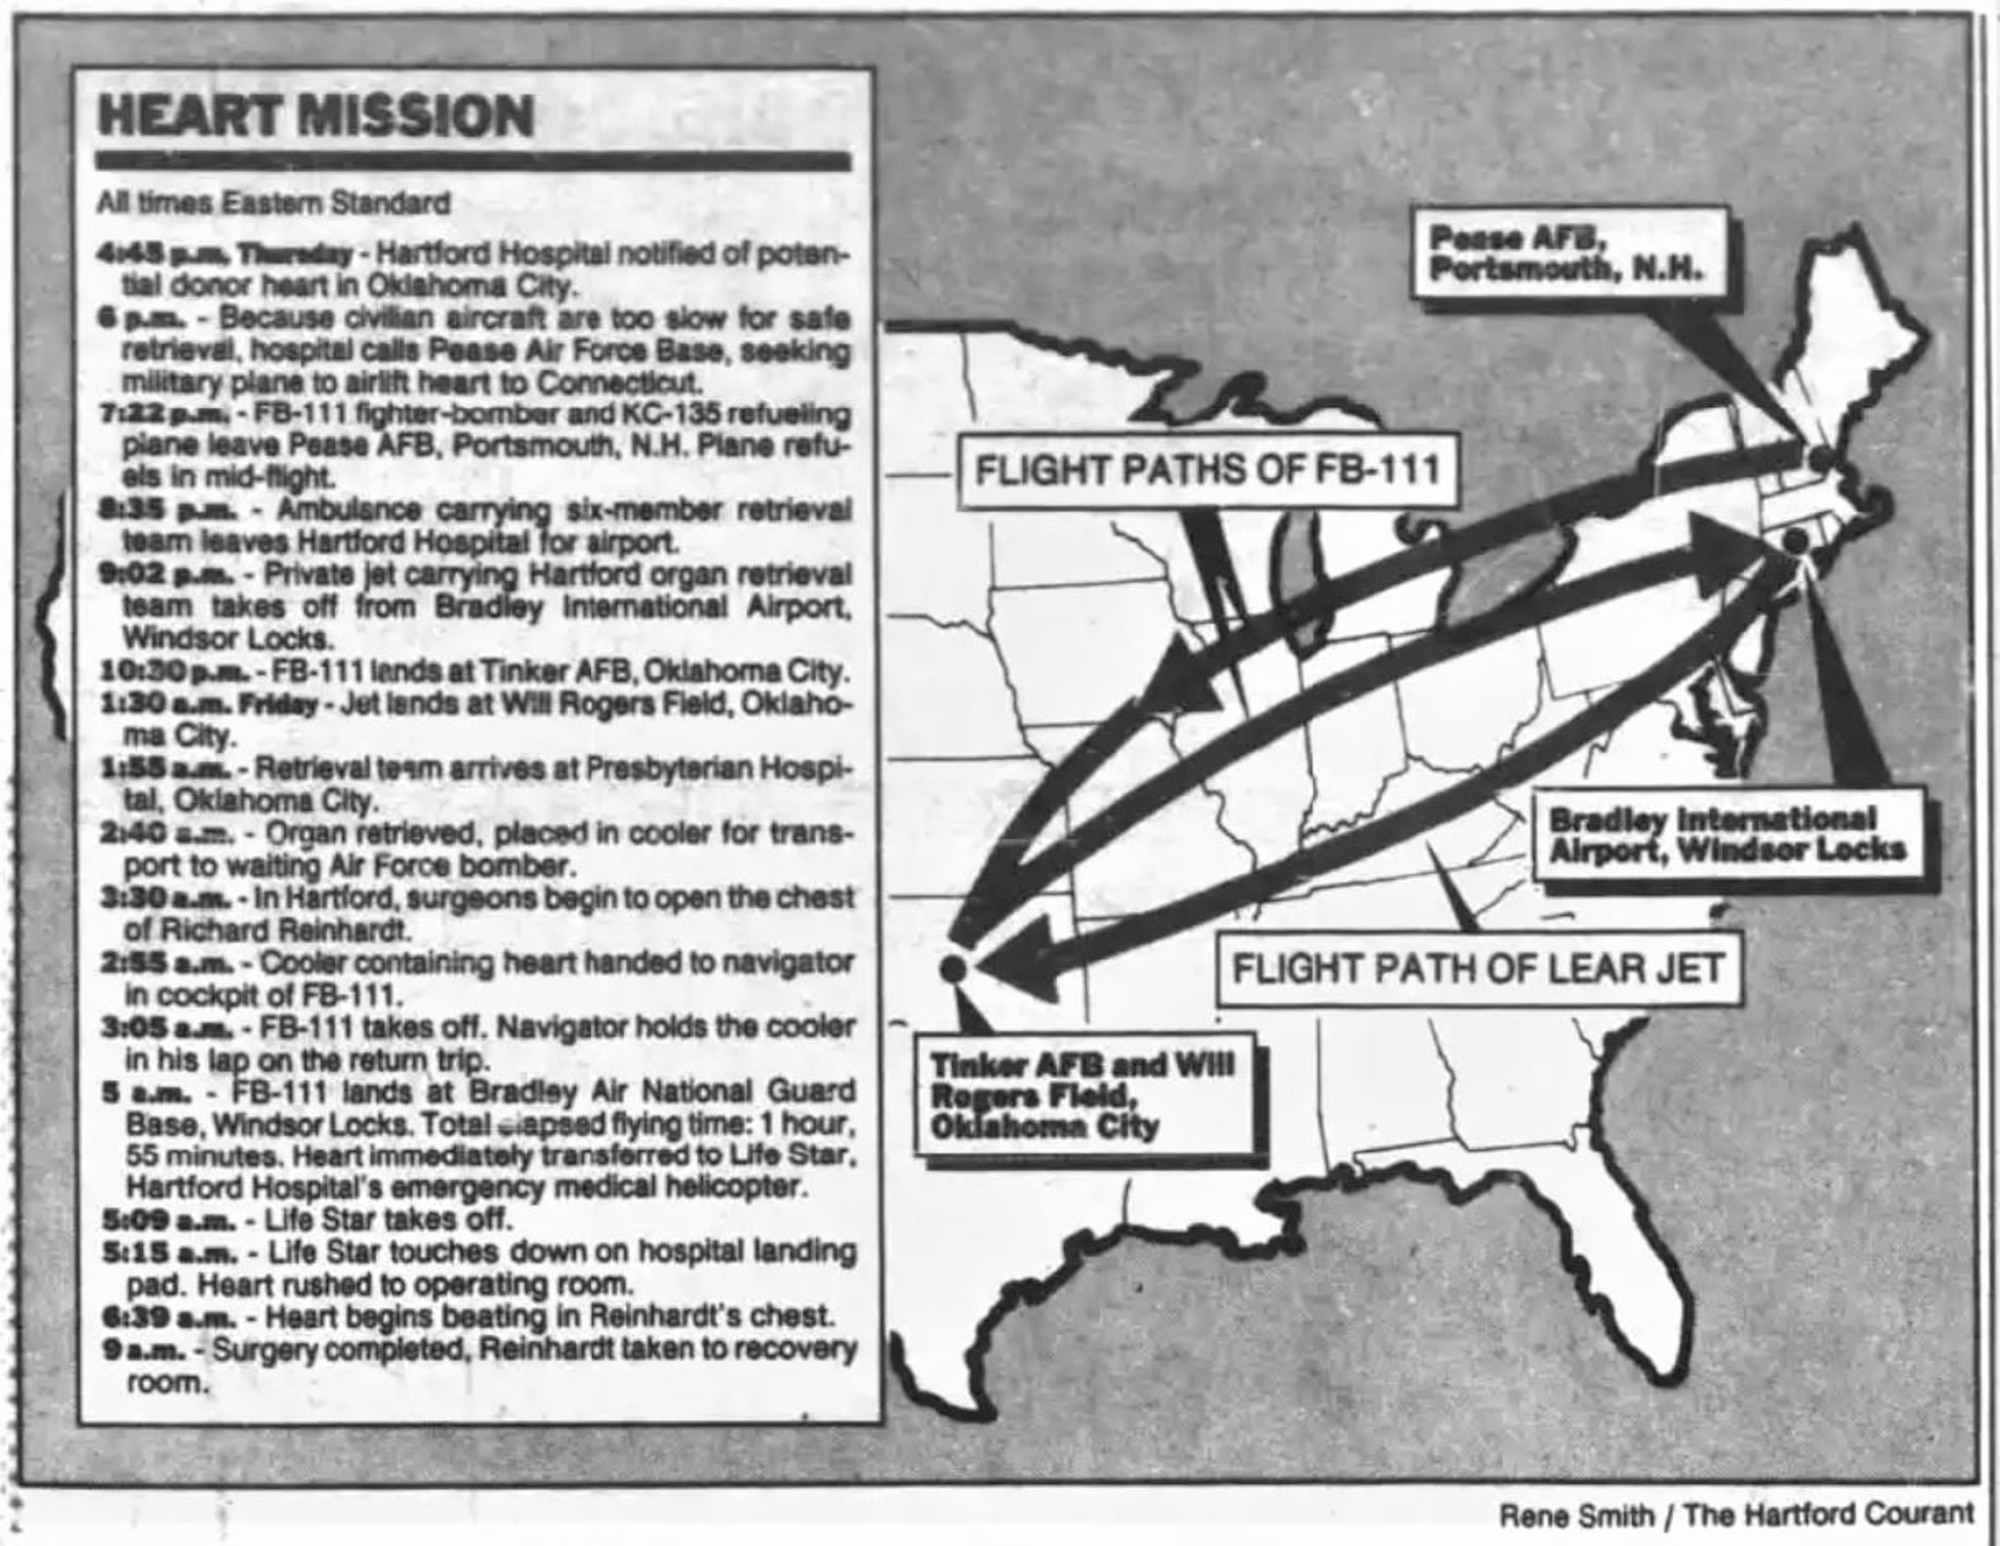 A graphic showing the route that the the FB-111 aircraft used to transport the donor heart for the heart transplant traveled. (Courtesy Graphic, Rene Smith/The Hartford Courant)